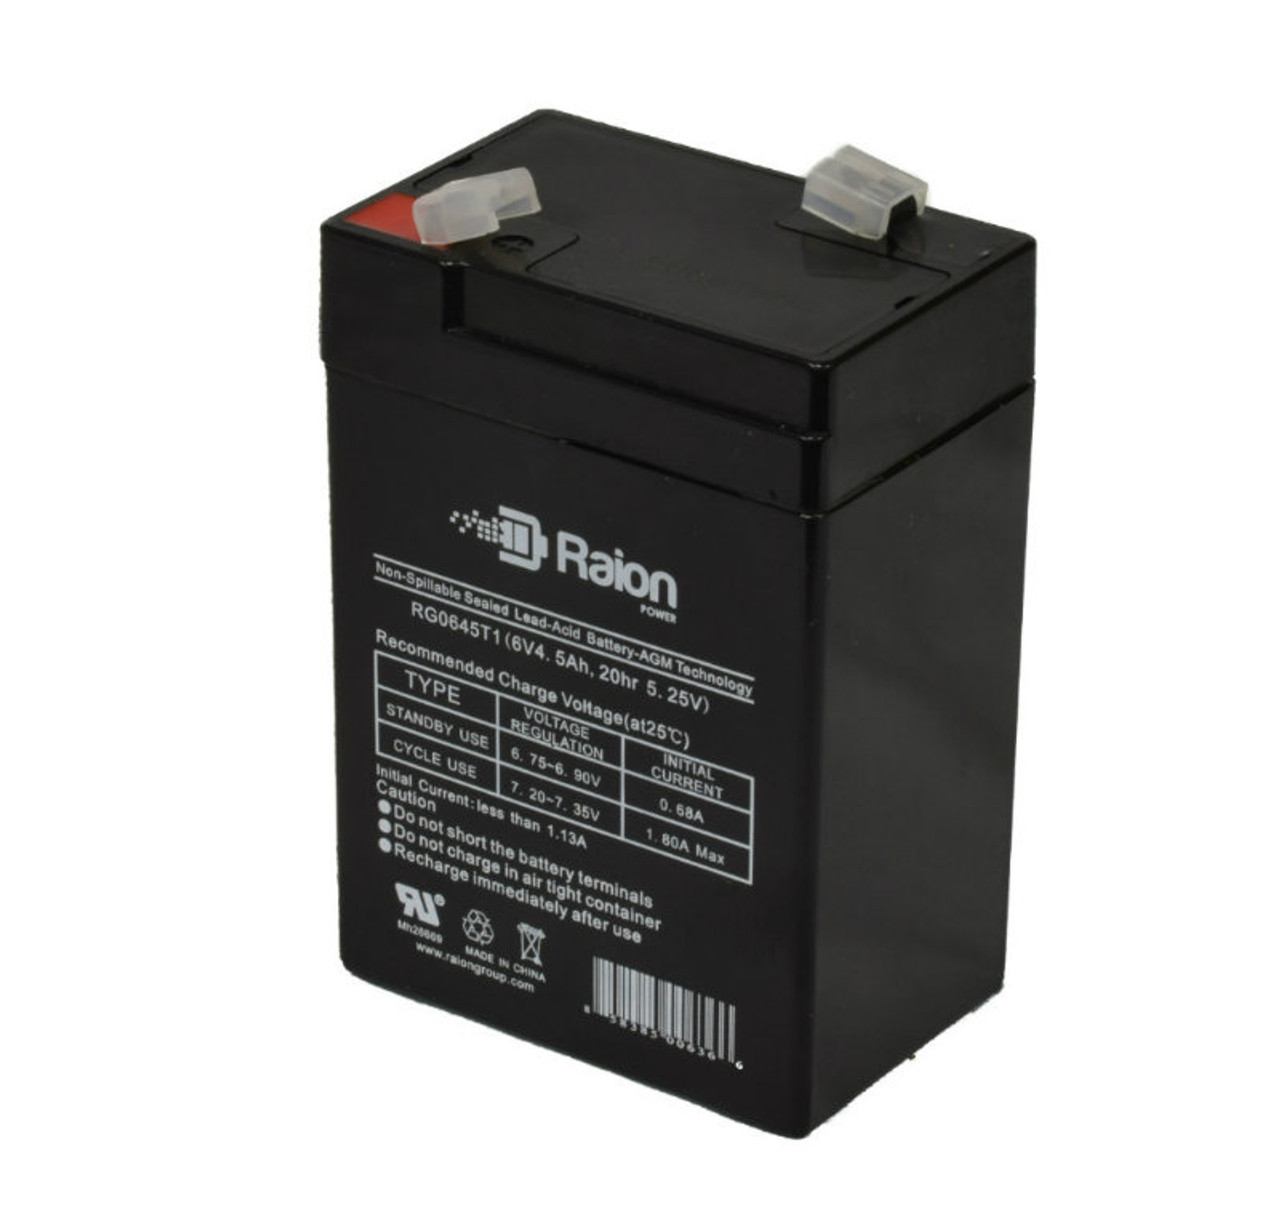 Raion Power RG0645T1 6V 4.5Ah Replacement Battery Cartridge for Gaston GT6-4.2L